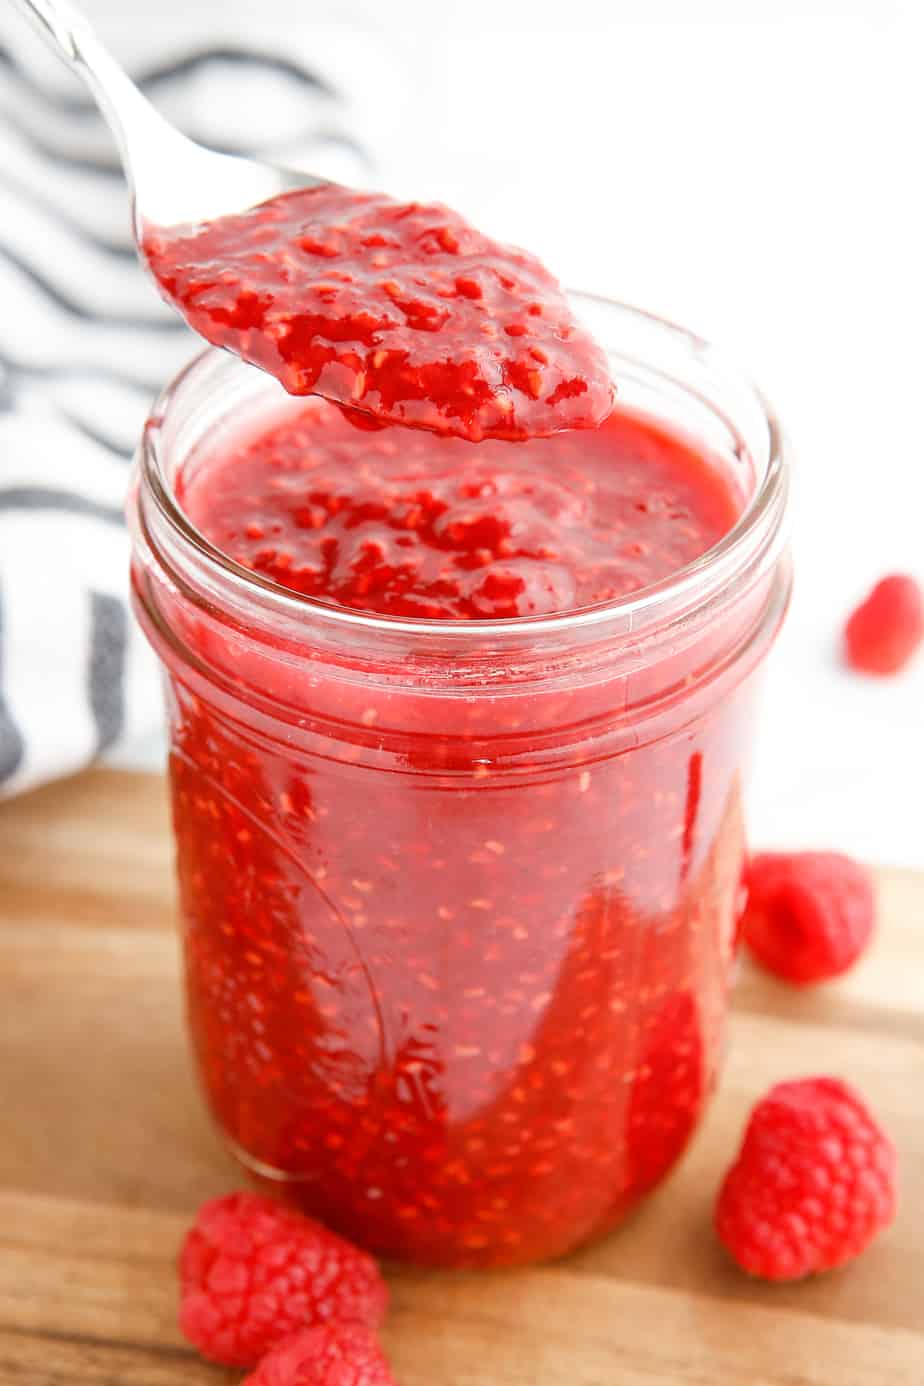 Raspberry jam being lifted from a jar with a spoon from the side. Fresh raspberries are scattered on the wood cutting board beneath the jar